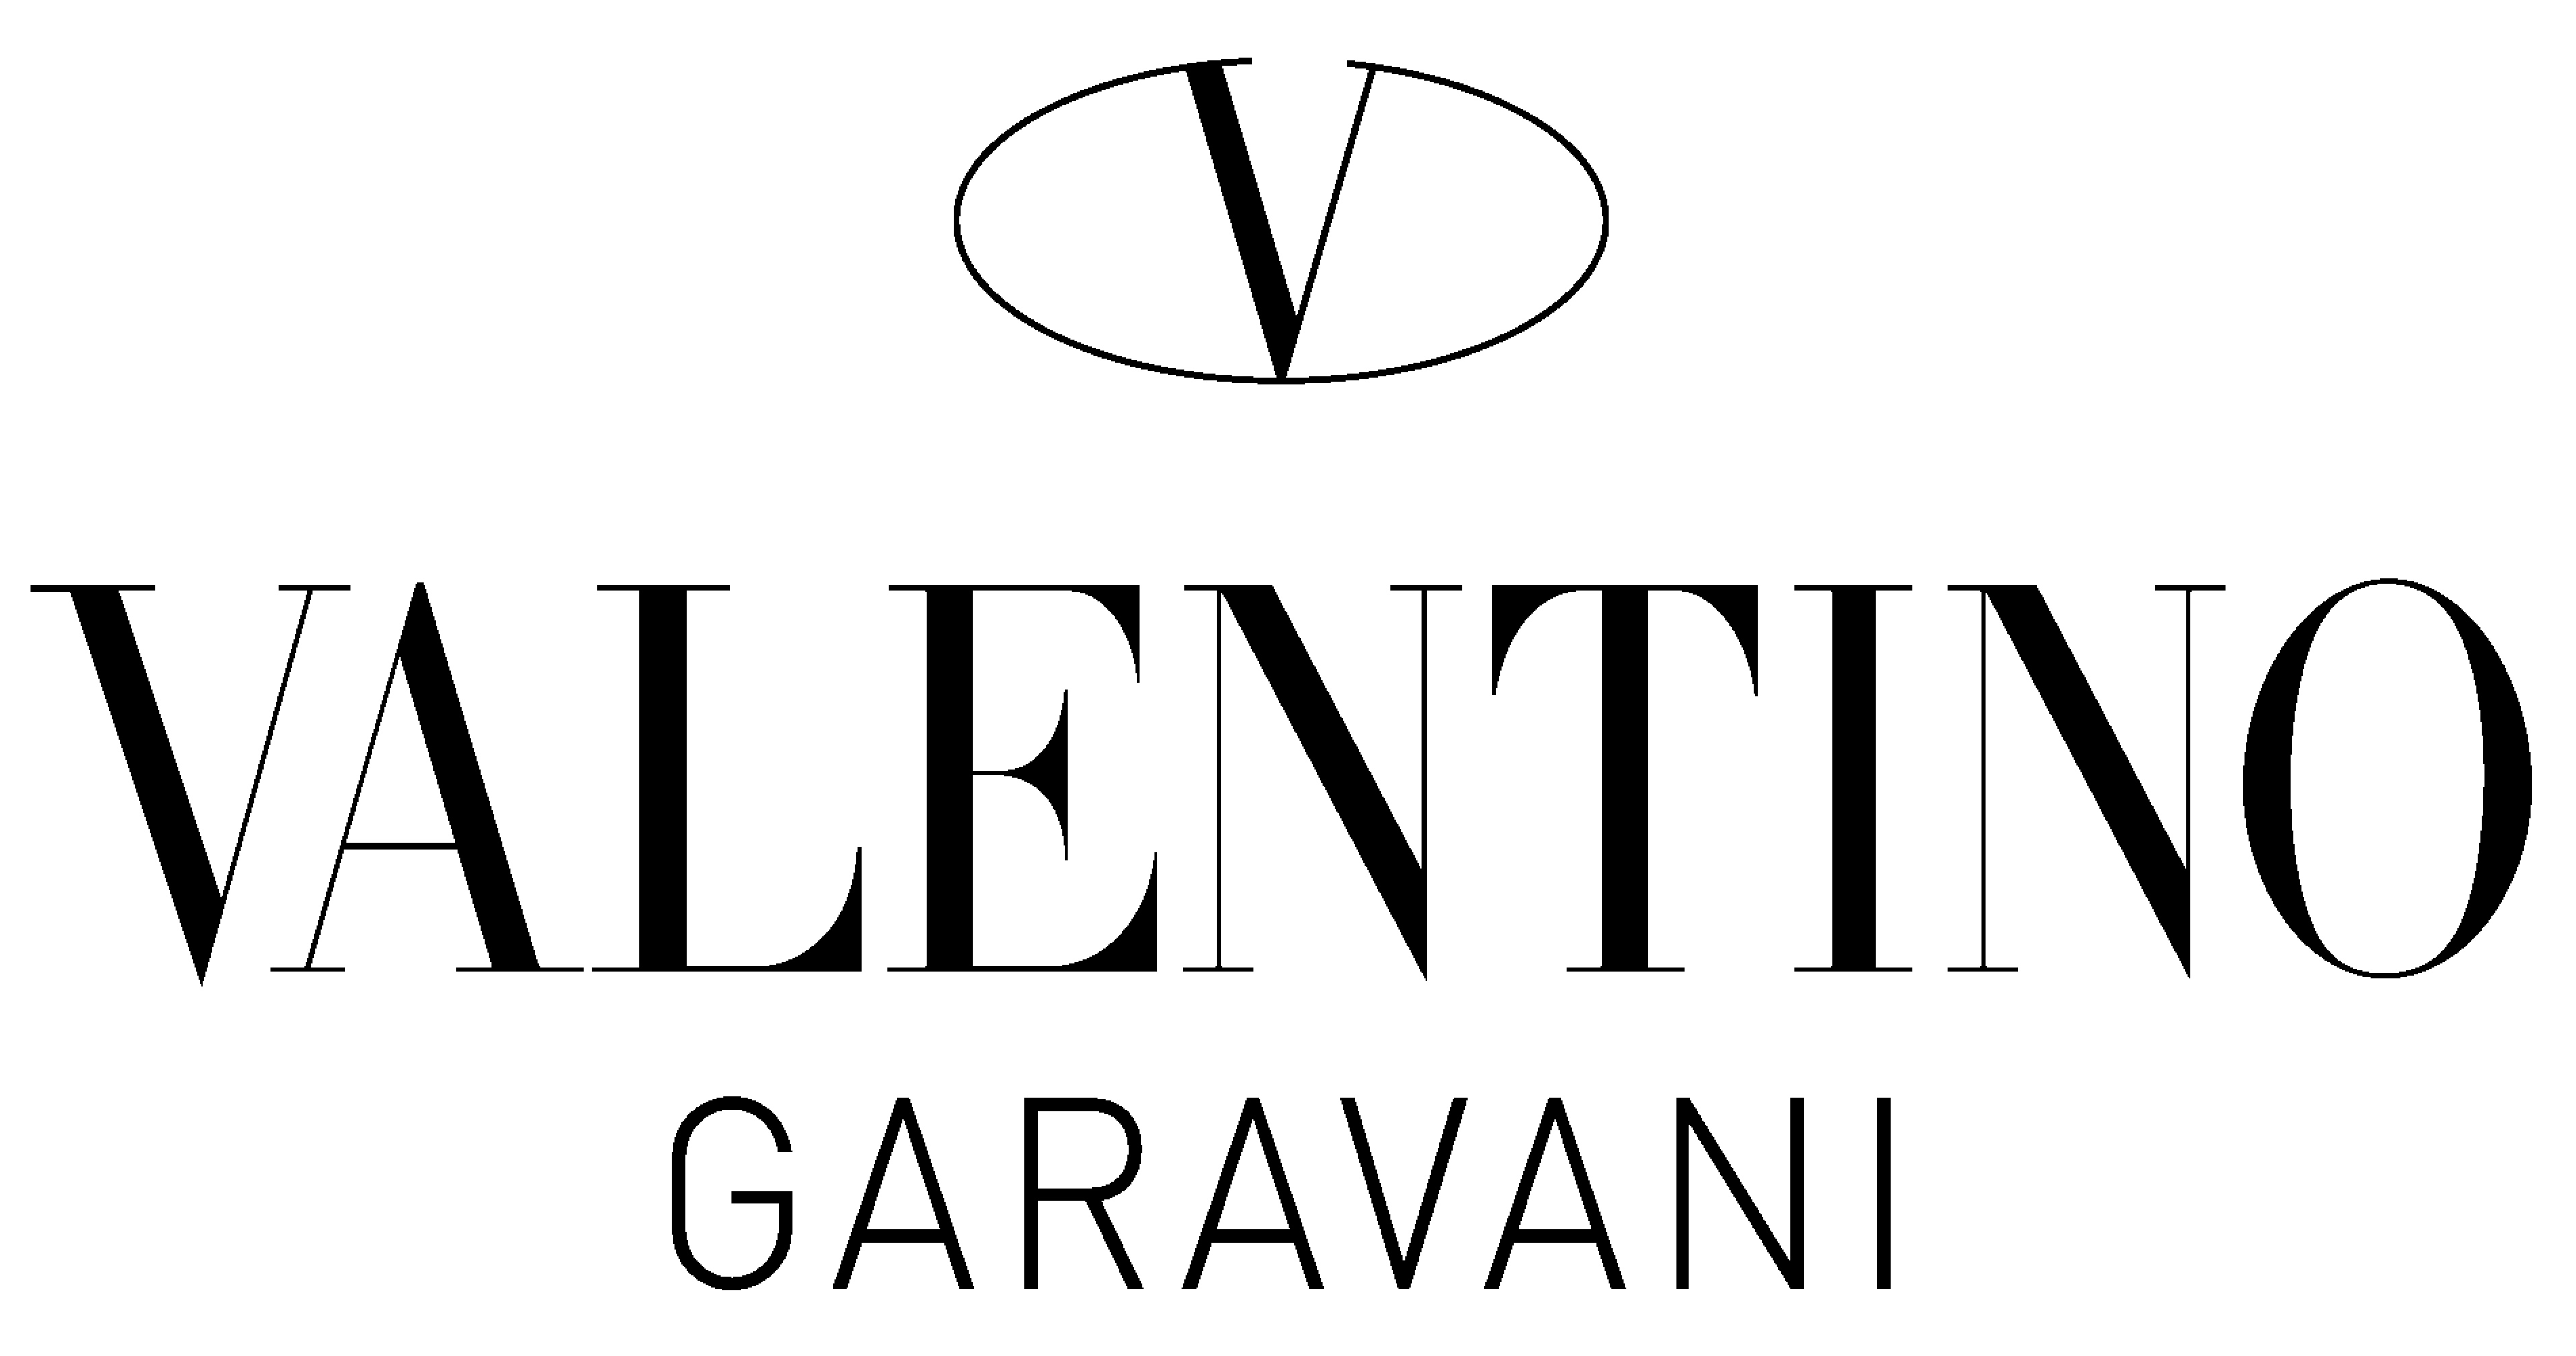 Expensive Clothing Brand Logo - Most Expensive Clothing Brands of World